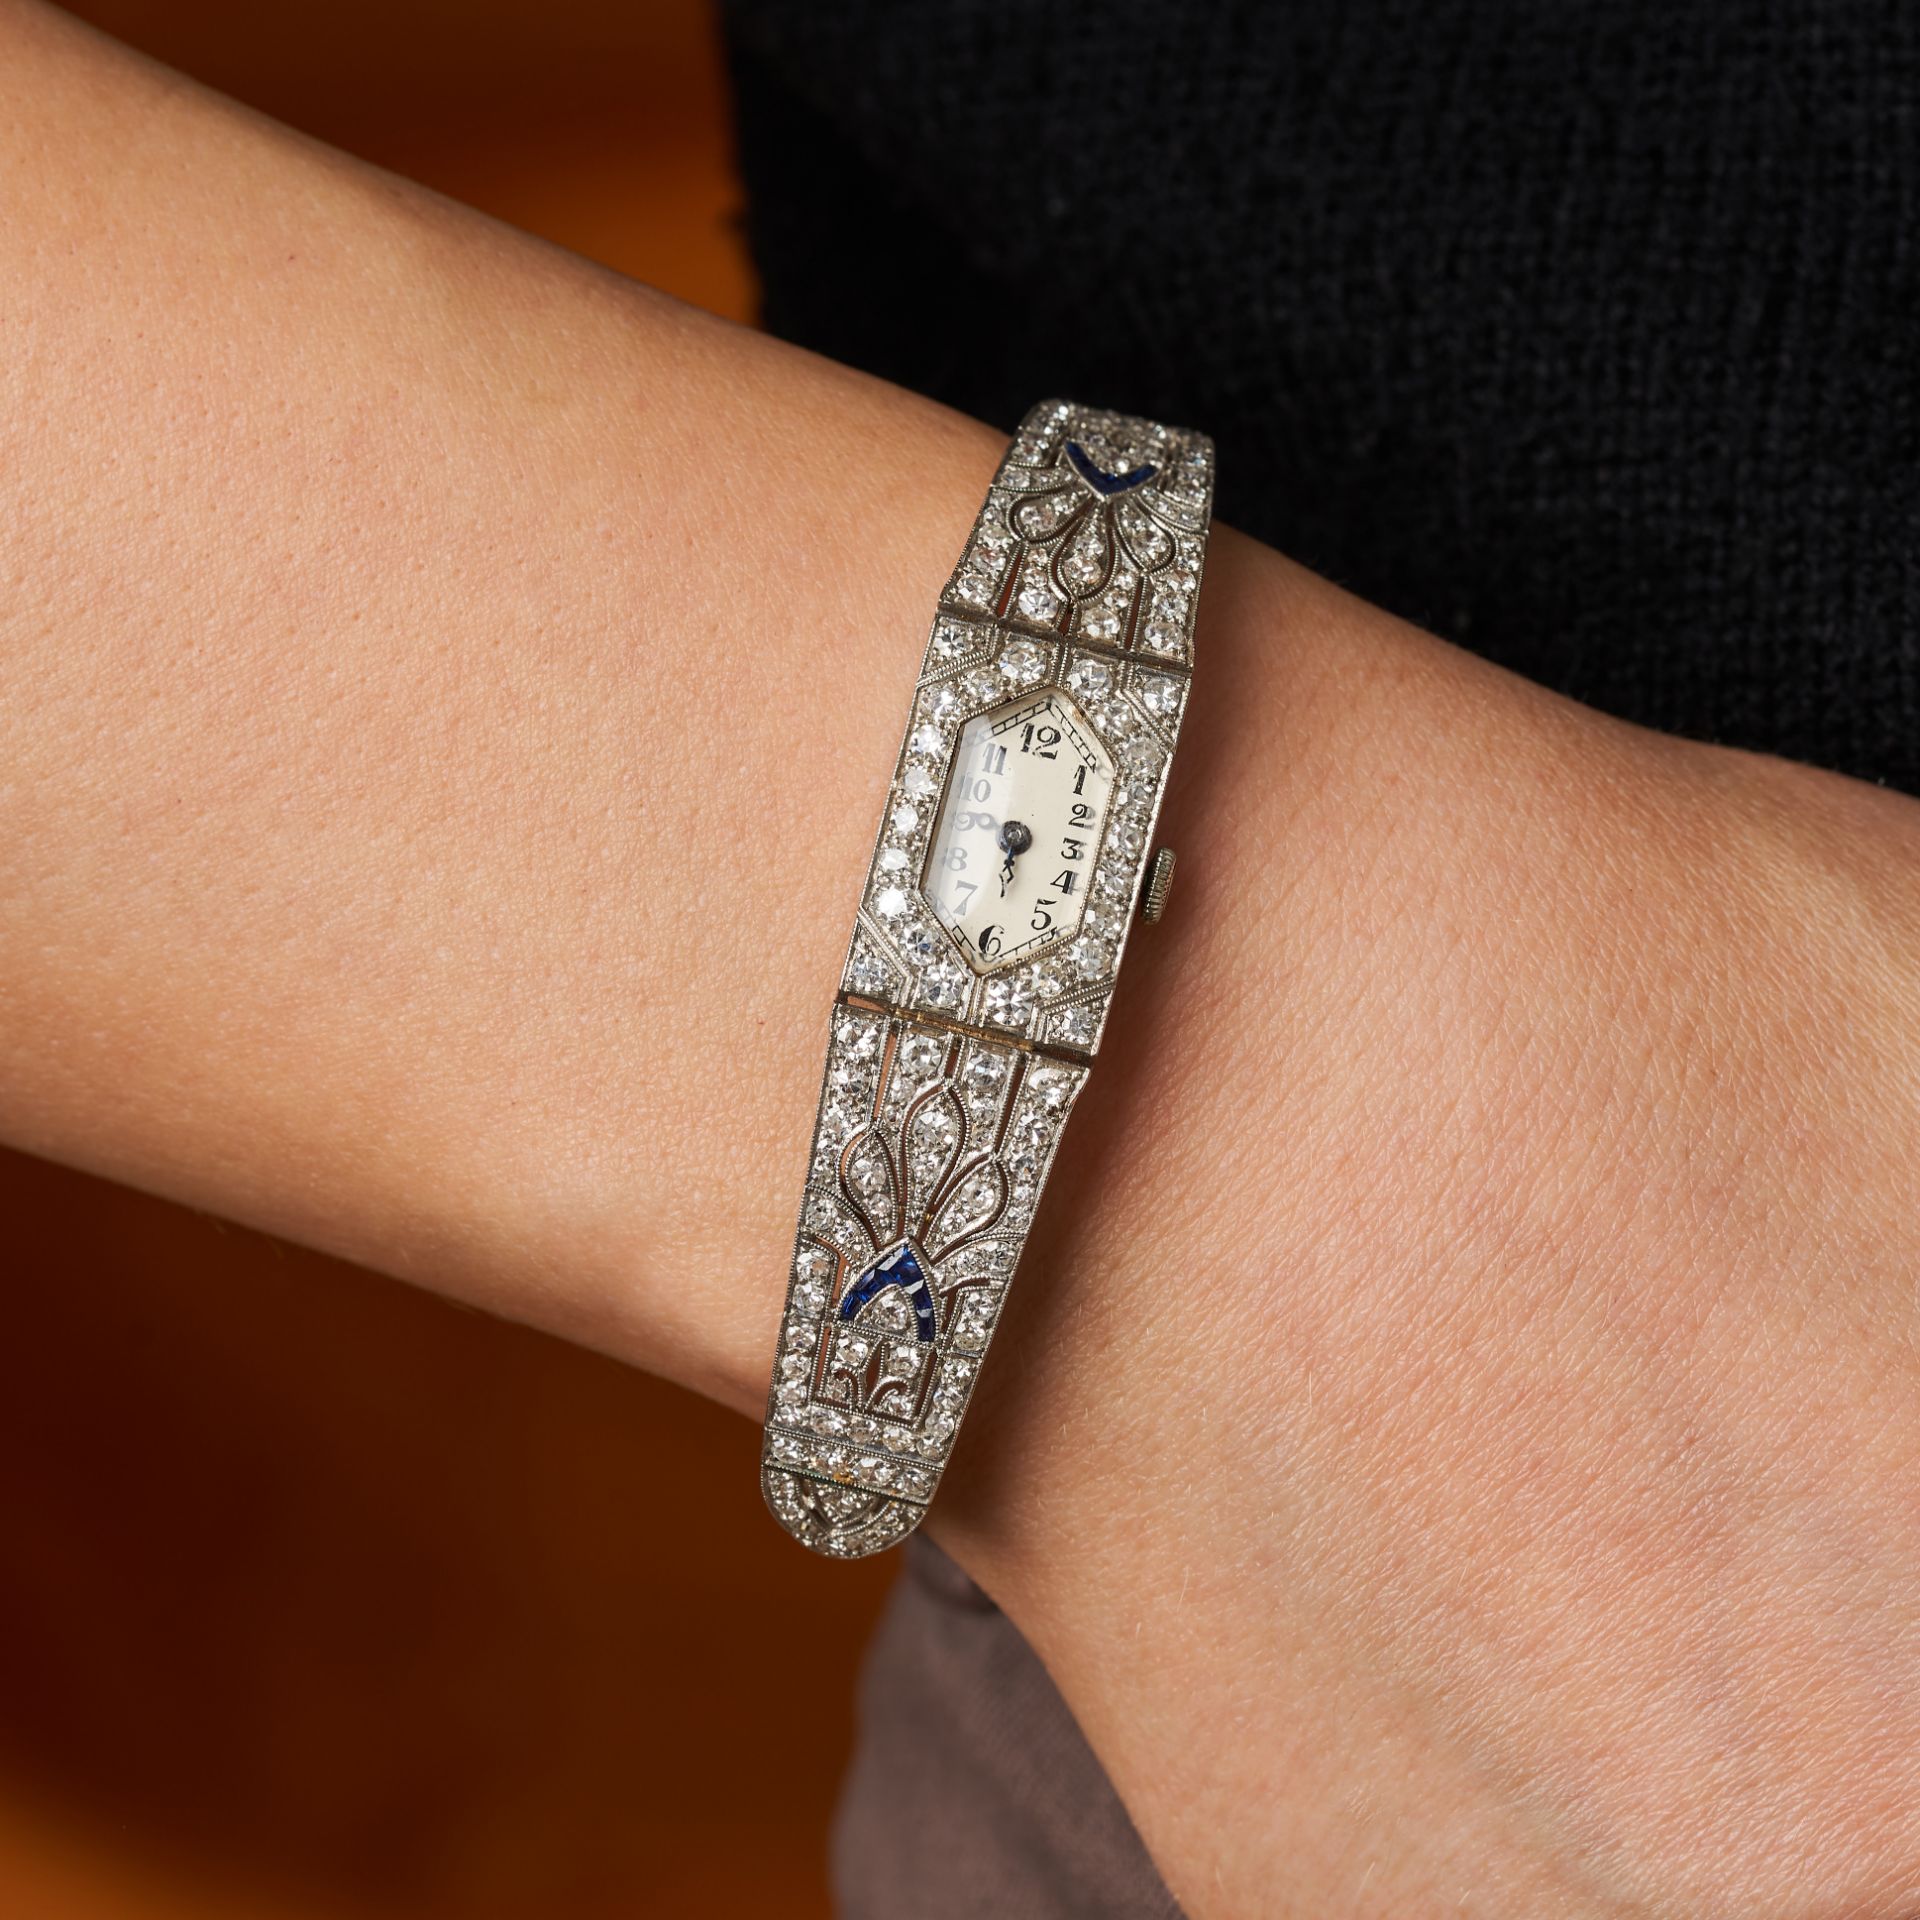 AN ART DECO SAPPHIRE AND DIAMOND COCKTAIL WATCH in platinum, the hexagonal watch face accented by...